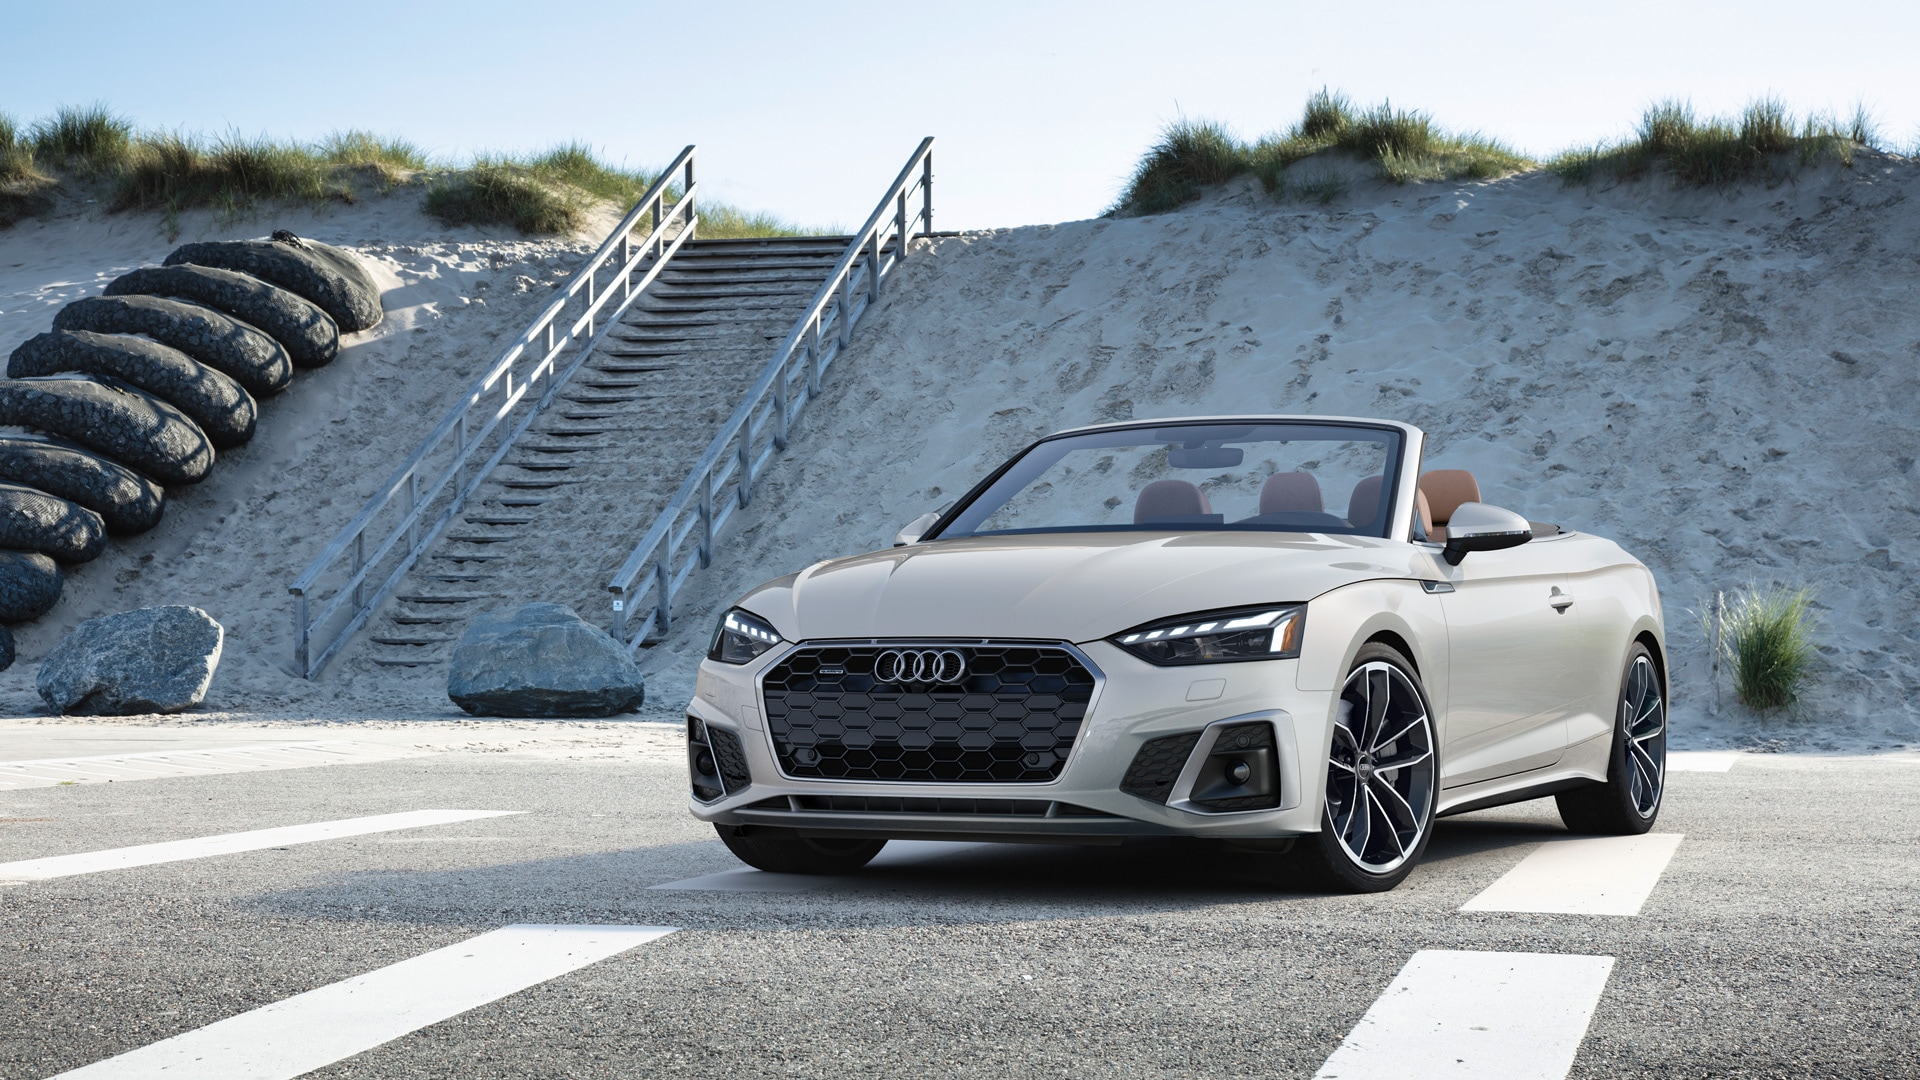 Top 5 Audi Accessories for Summer Drives